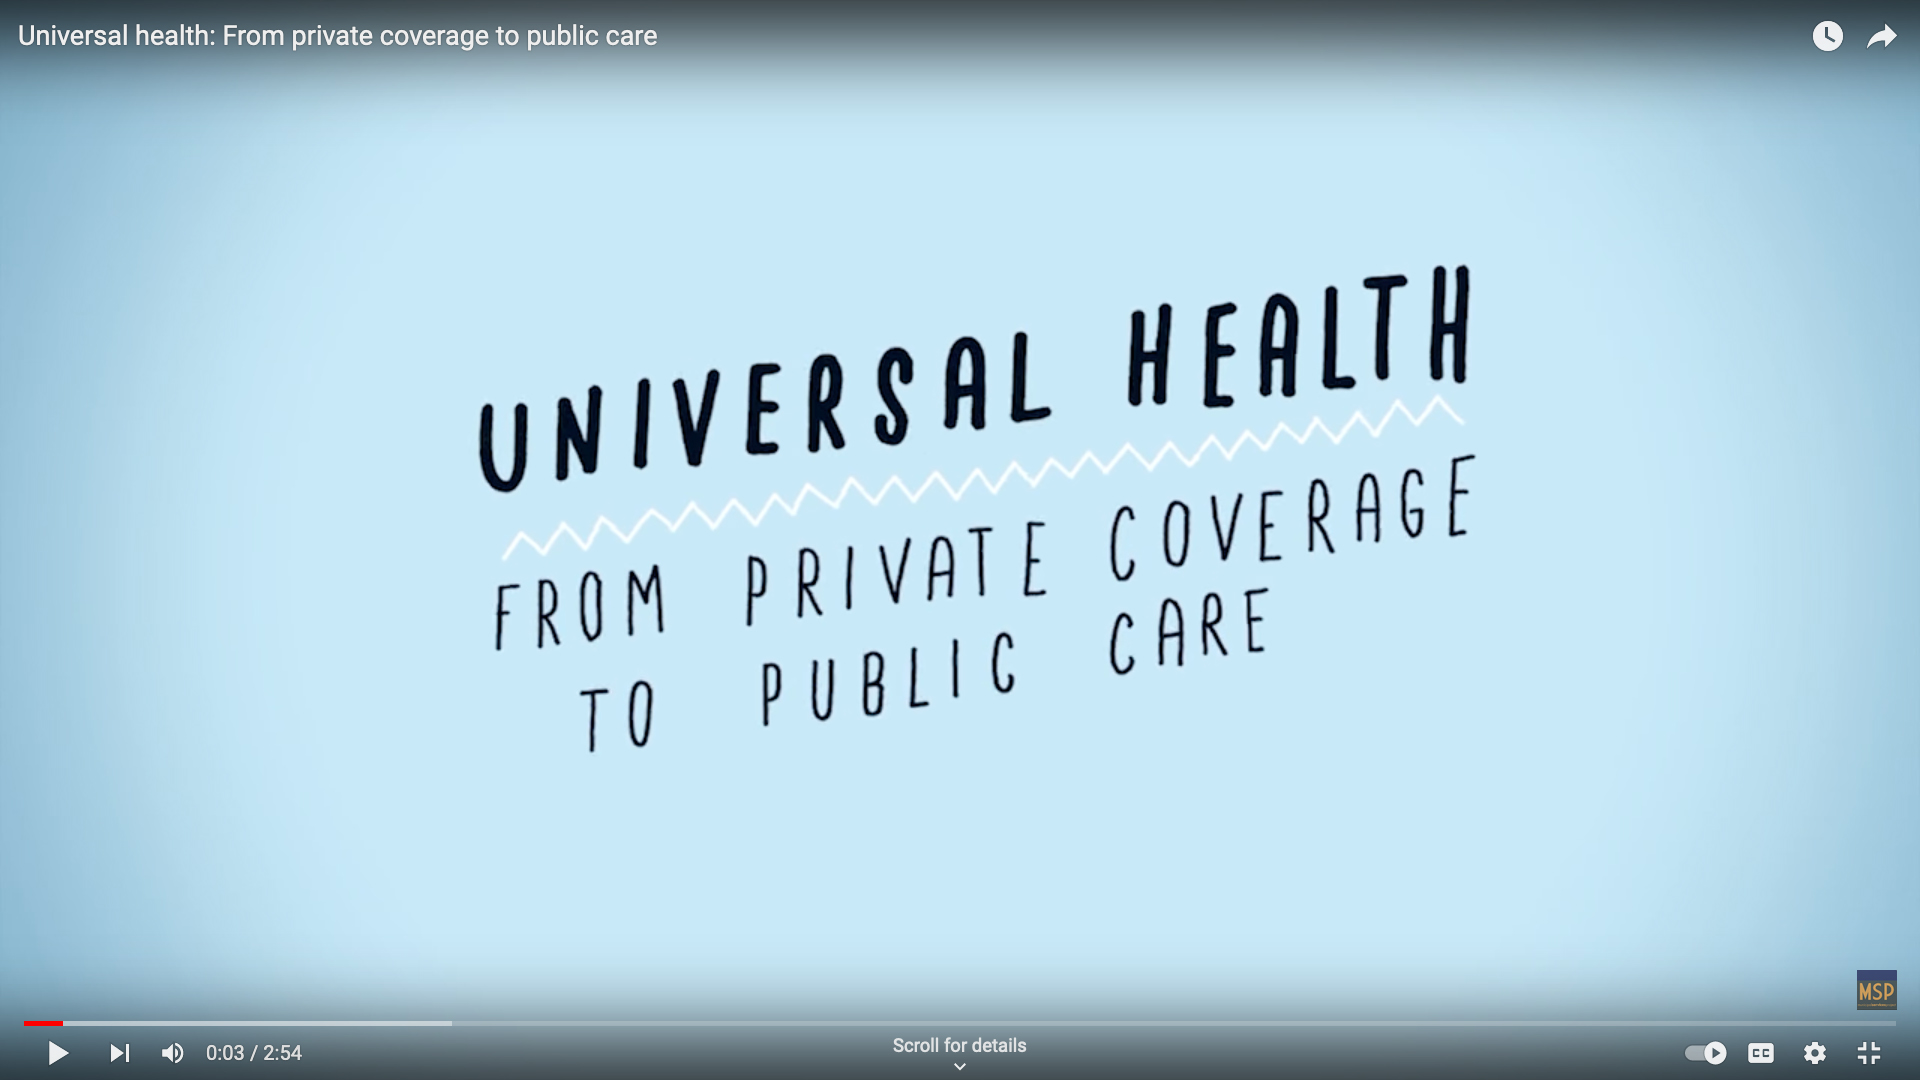 Universal health: From private coverage to public care image